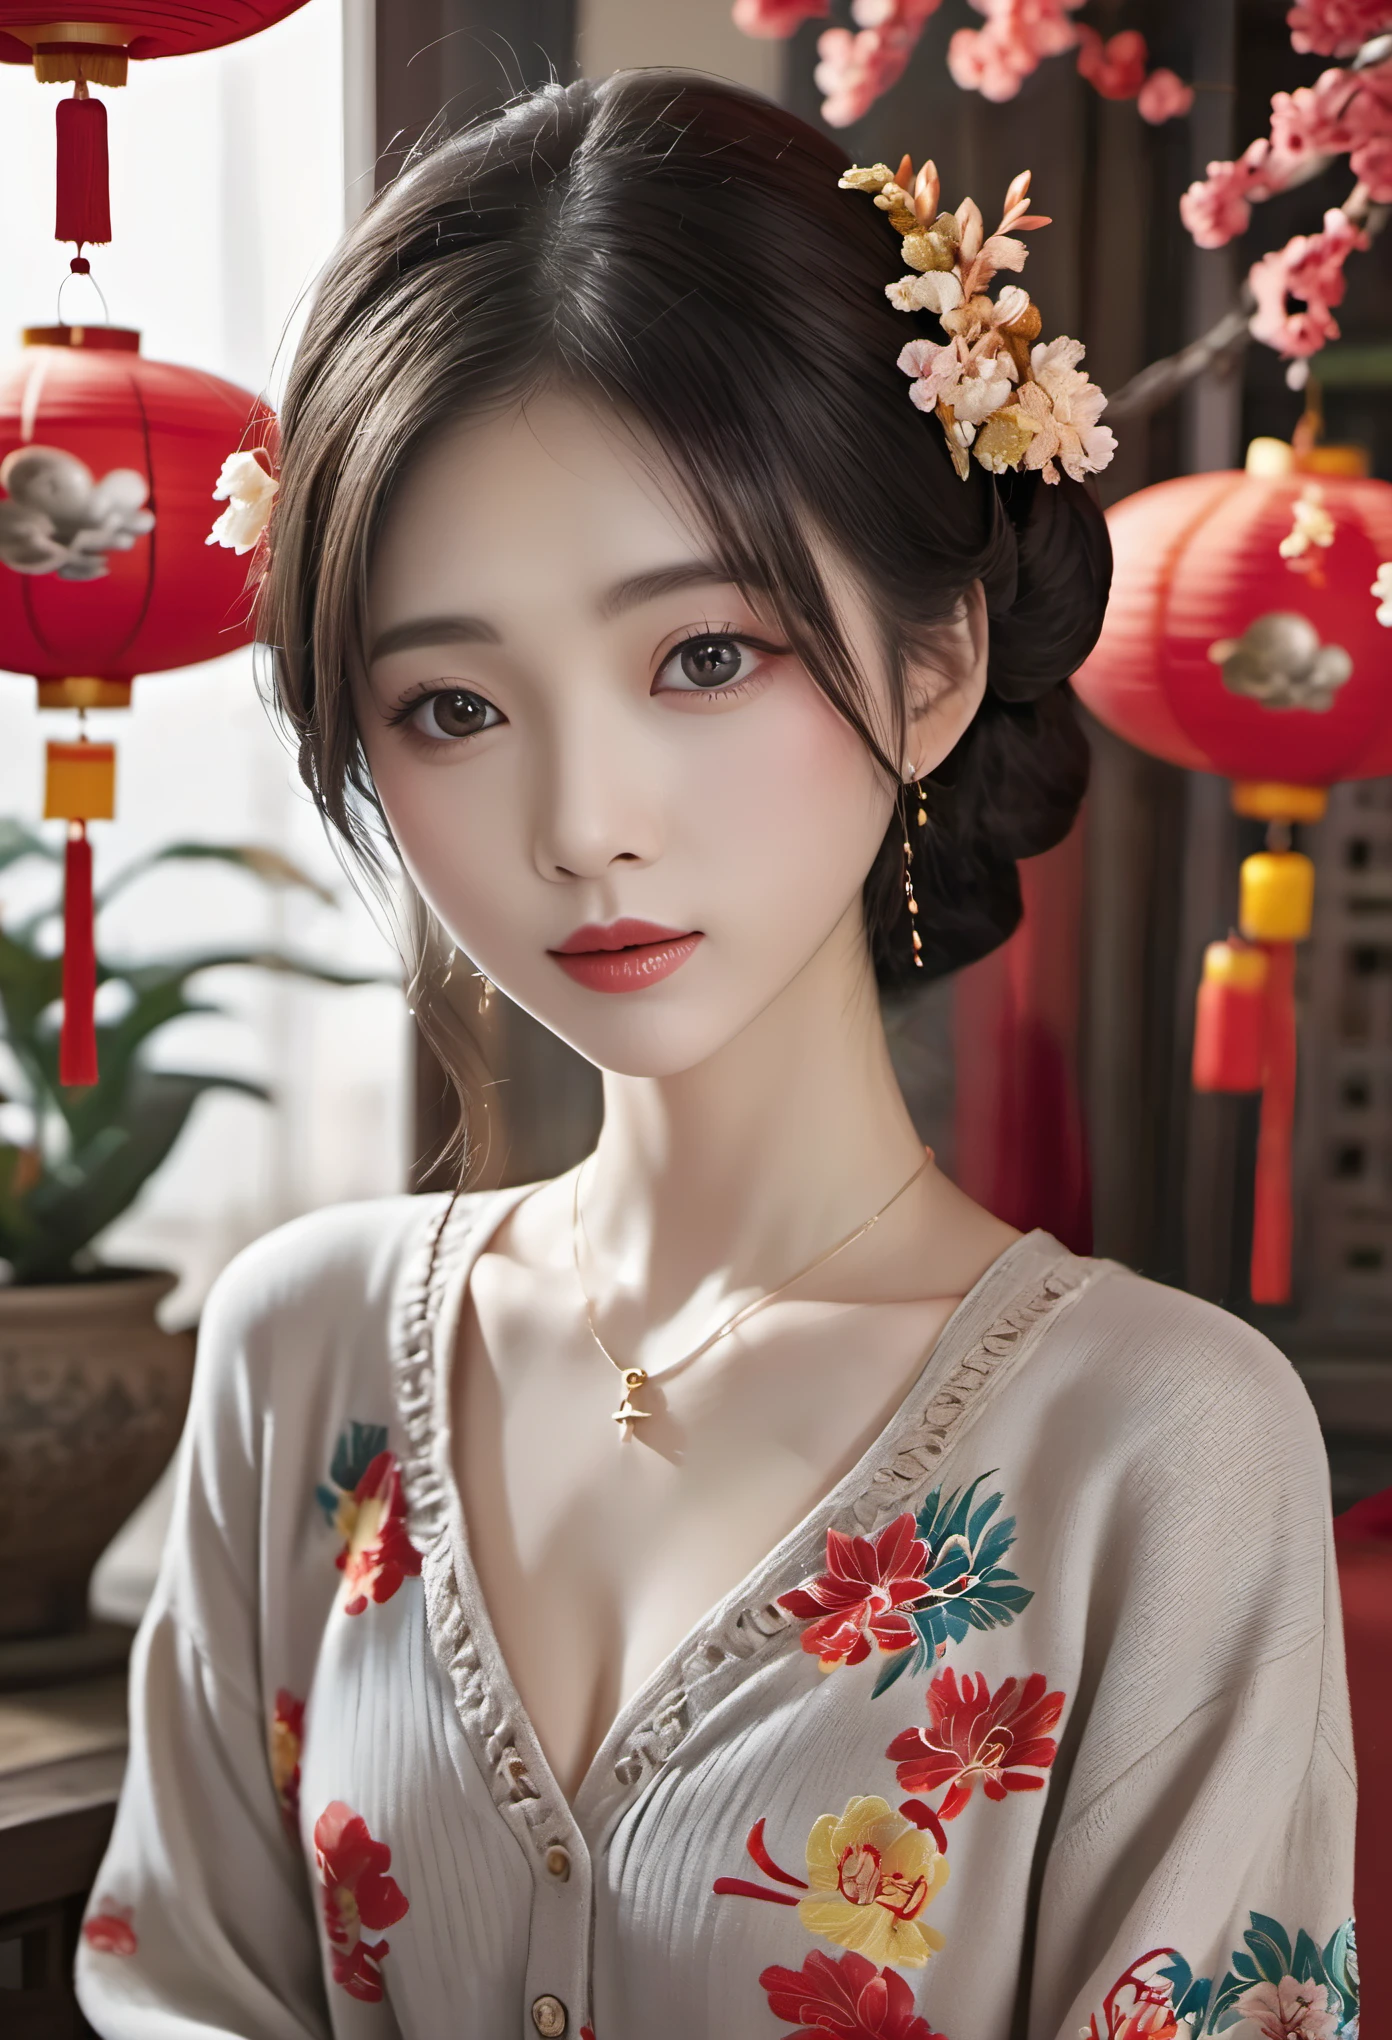 Eyes are very delicate，Exquisite hair color，（（（hair accessories）））,necklace,Put on a sweater,,skinny jeans,The room is filled with Chinese New Year decorations.（（（masterpiece）））, （（best quality））,（（Intricate details））,（（surreal））（8K）